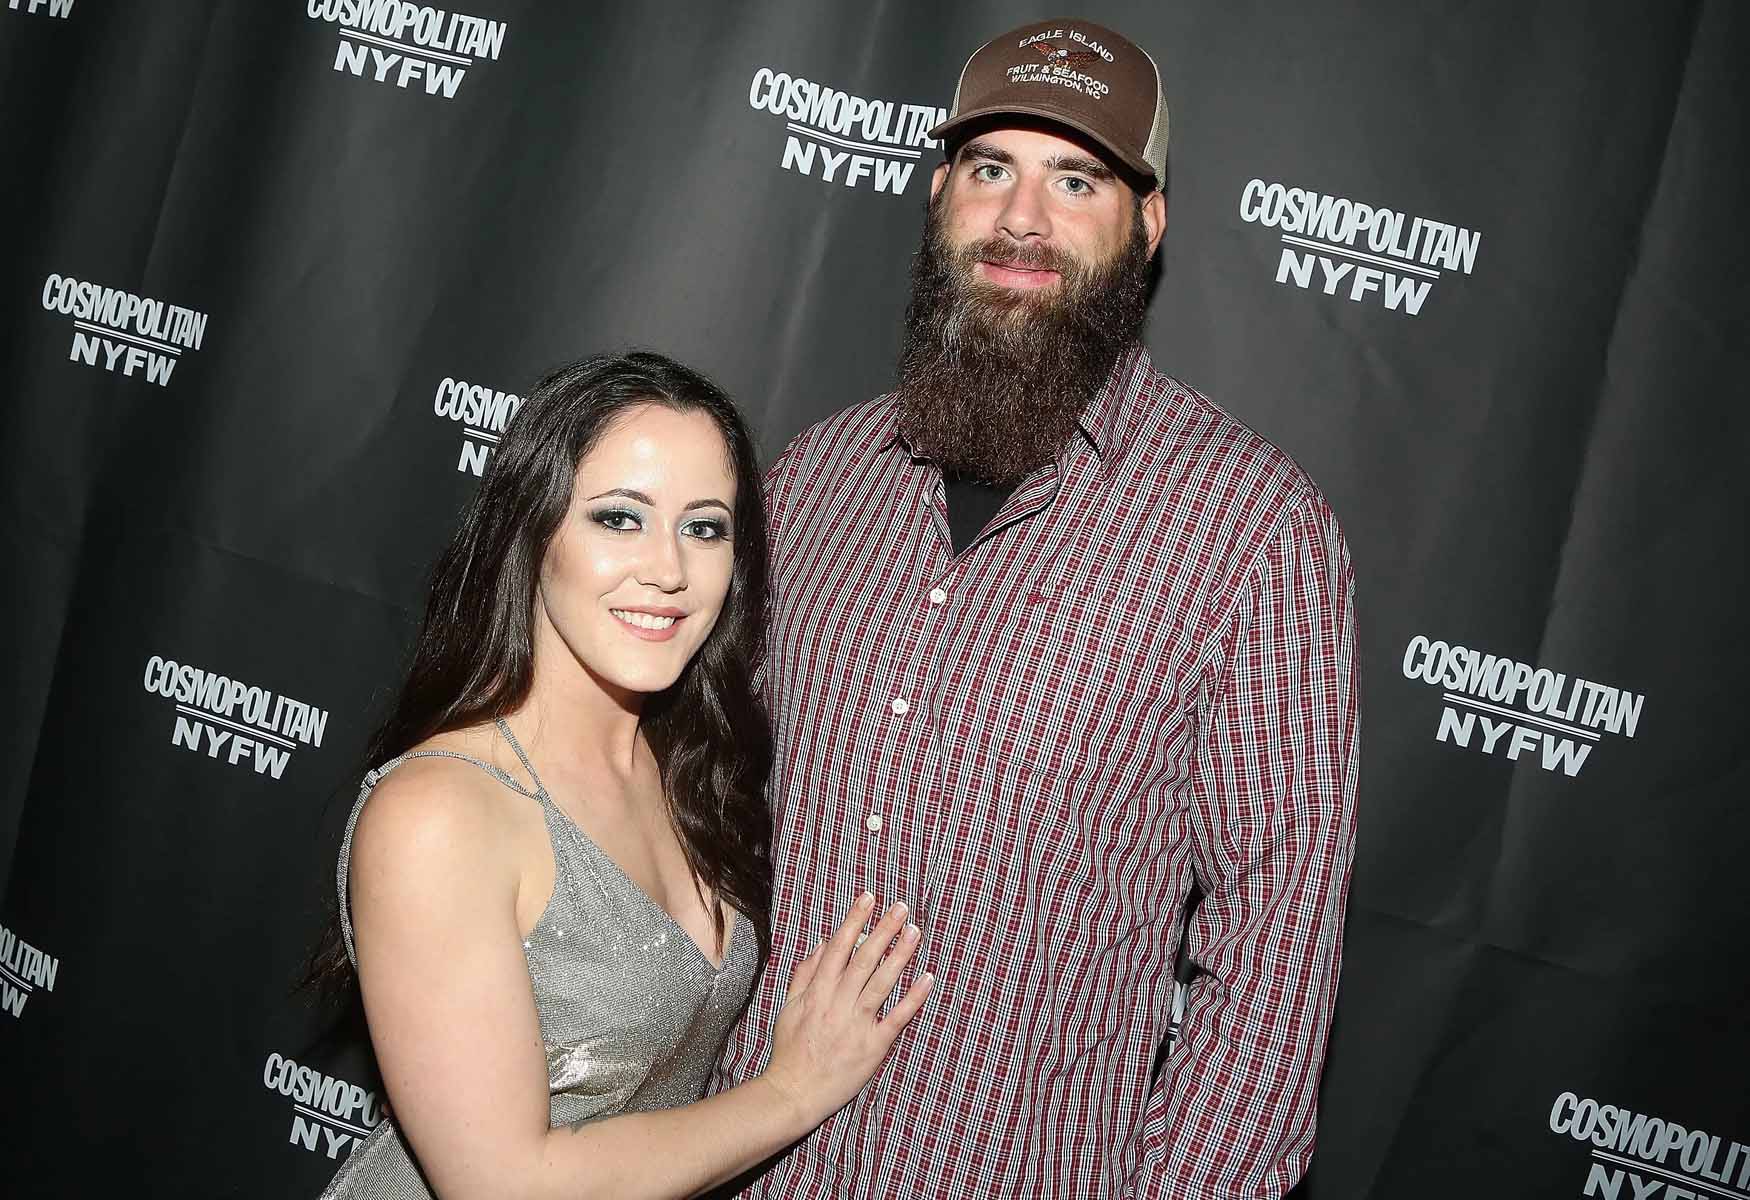 Jenelle Evans And David Eason Face Potential Charges For Assault And Neglect Of Son